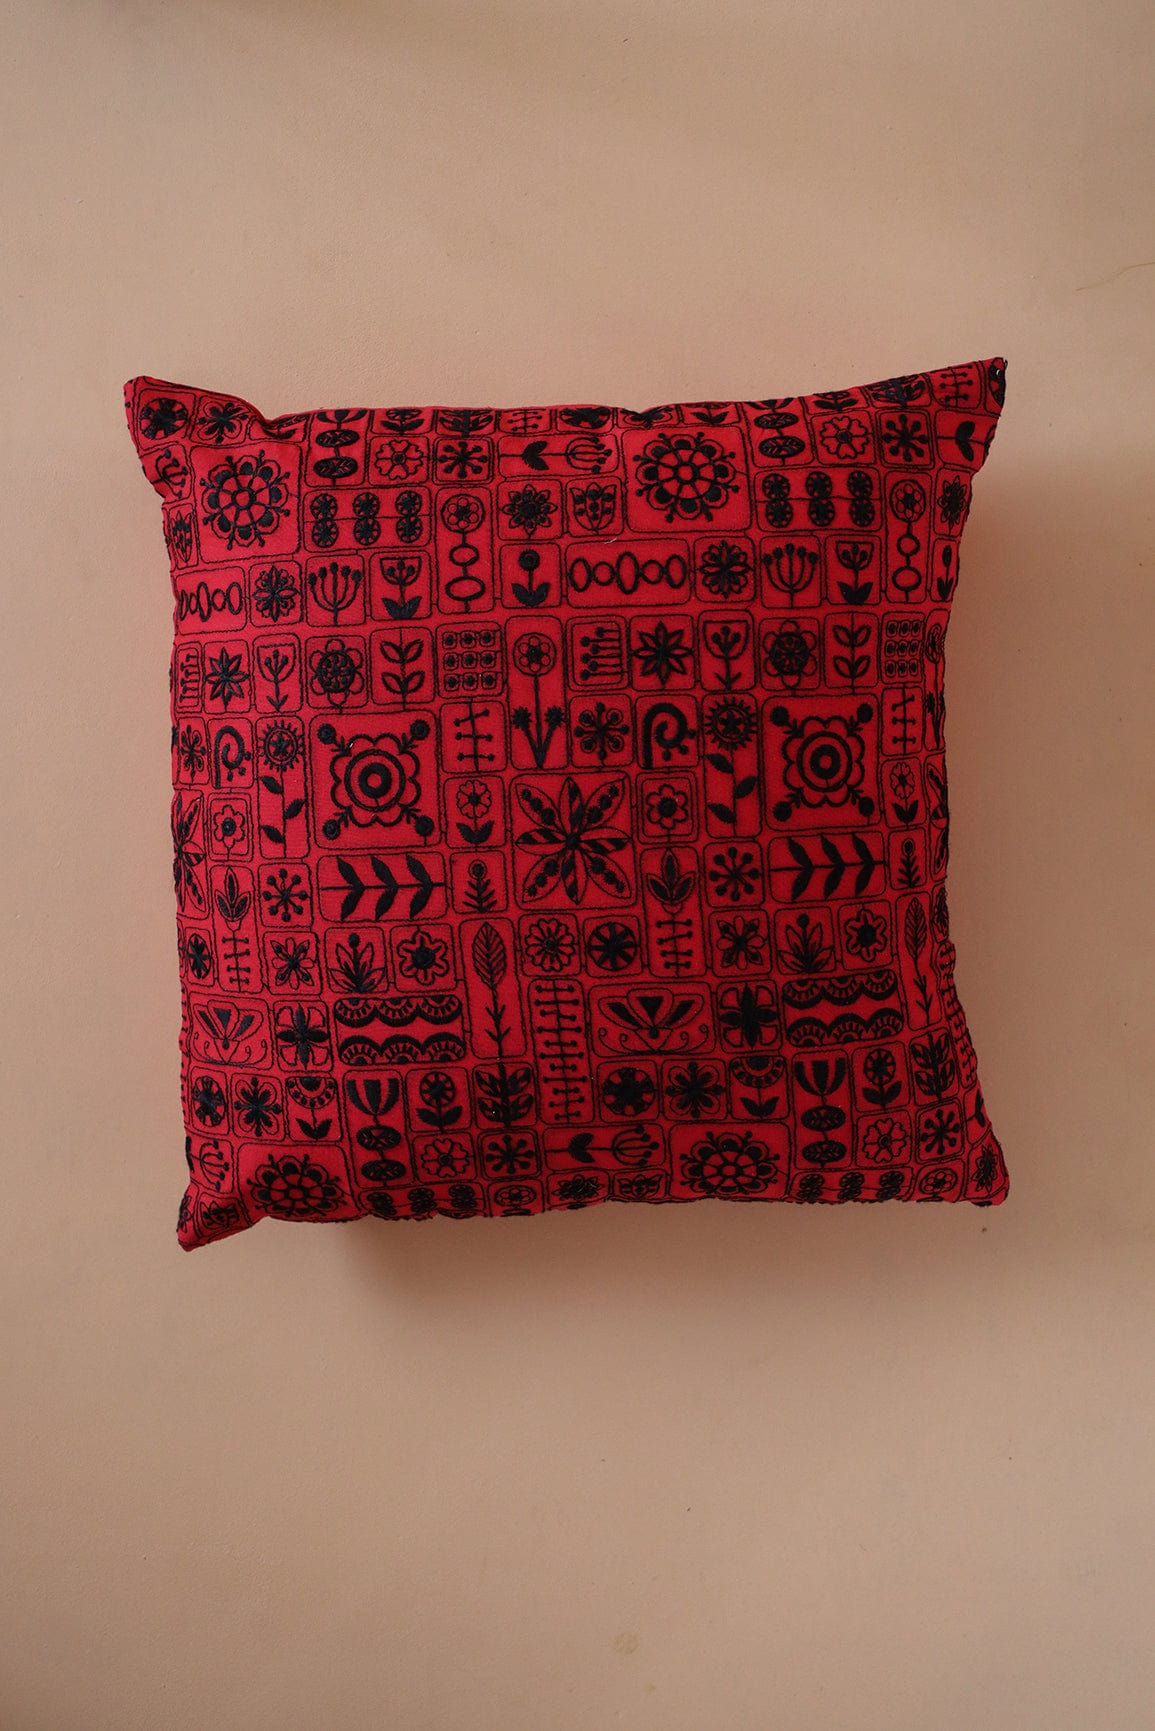 doeraa Black Cultural Embroidery on Red cotton Cushion Cover (16*16 inches)